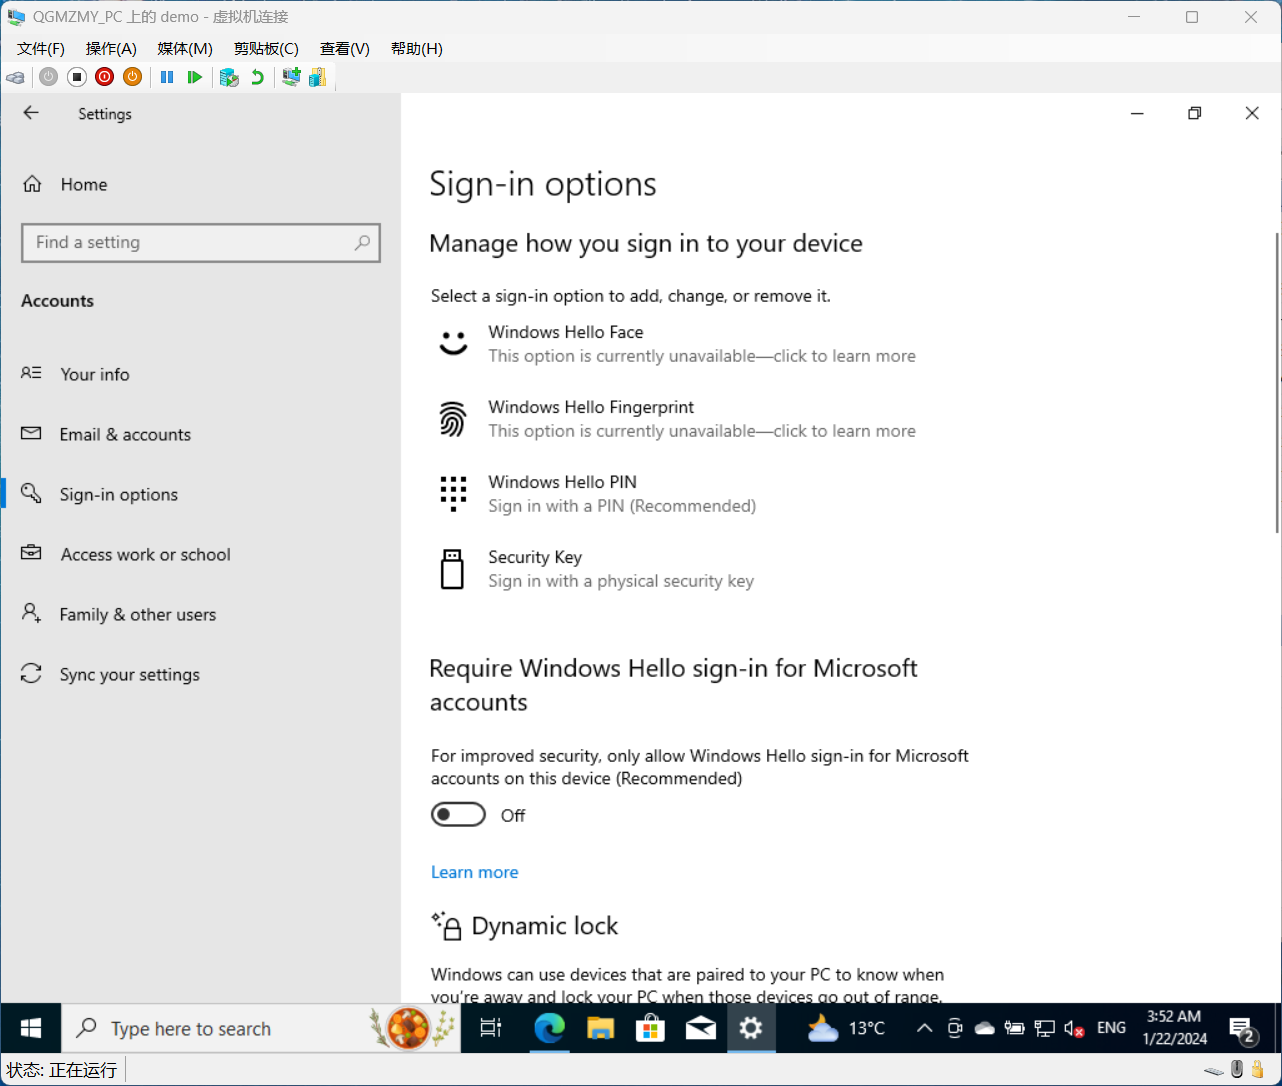 For improved security, only allow Windows Hello sign-in for Microsoft accounts on this device (Recommended)